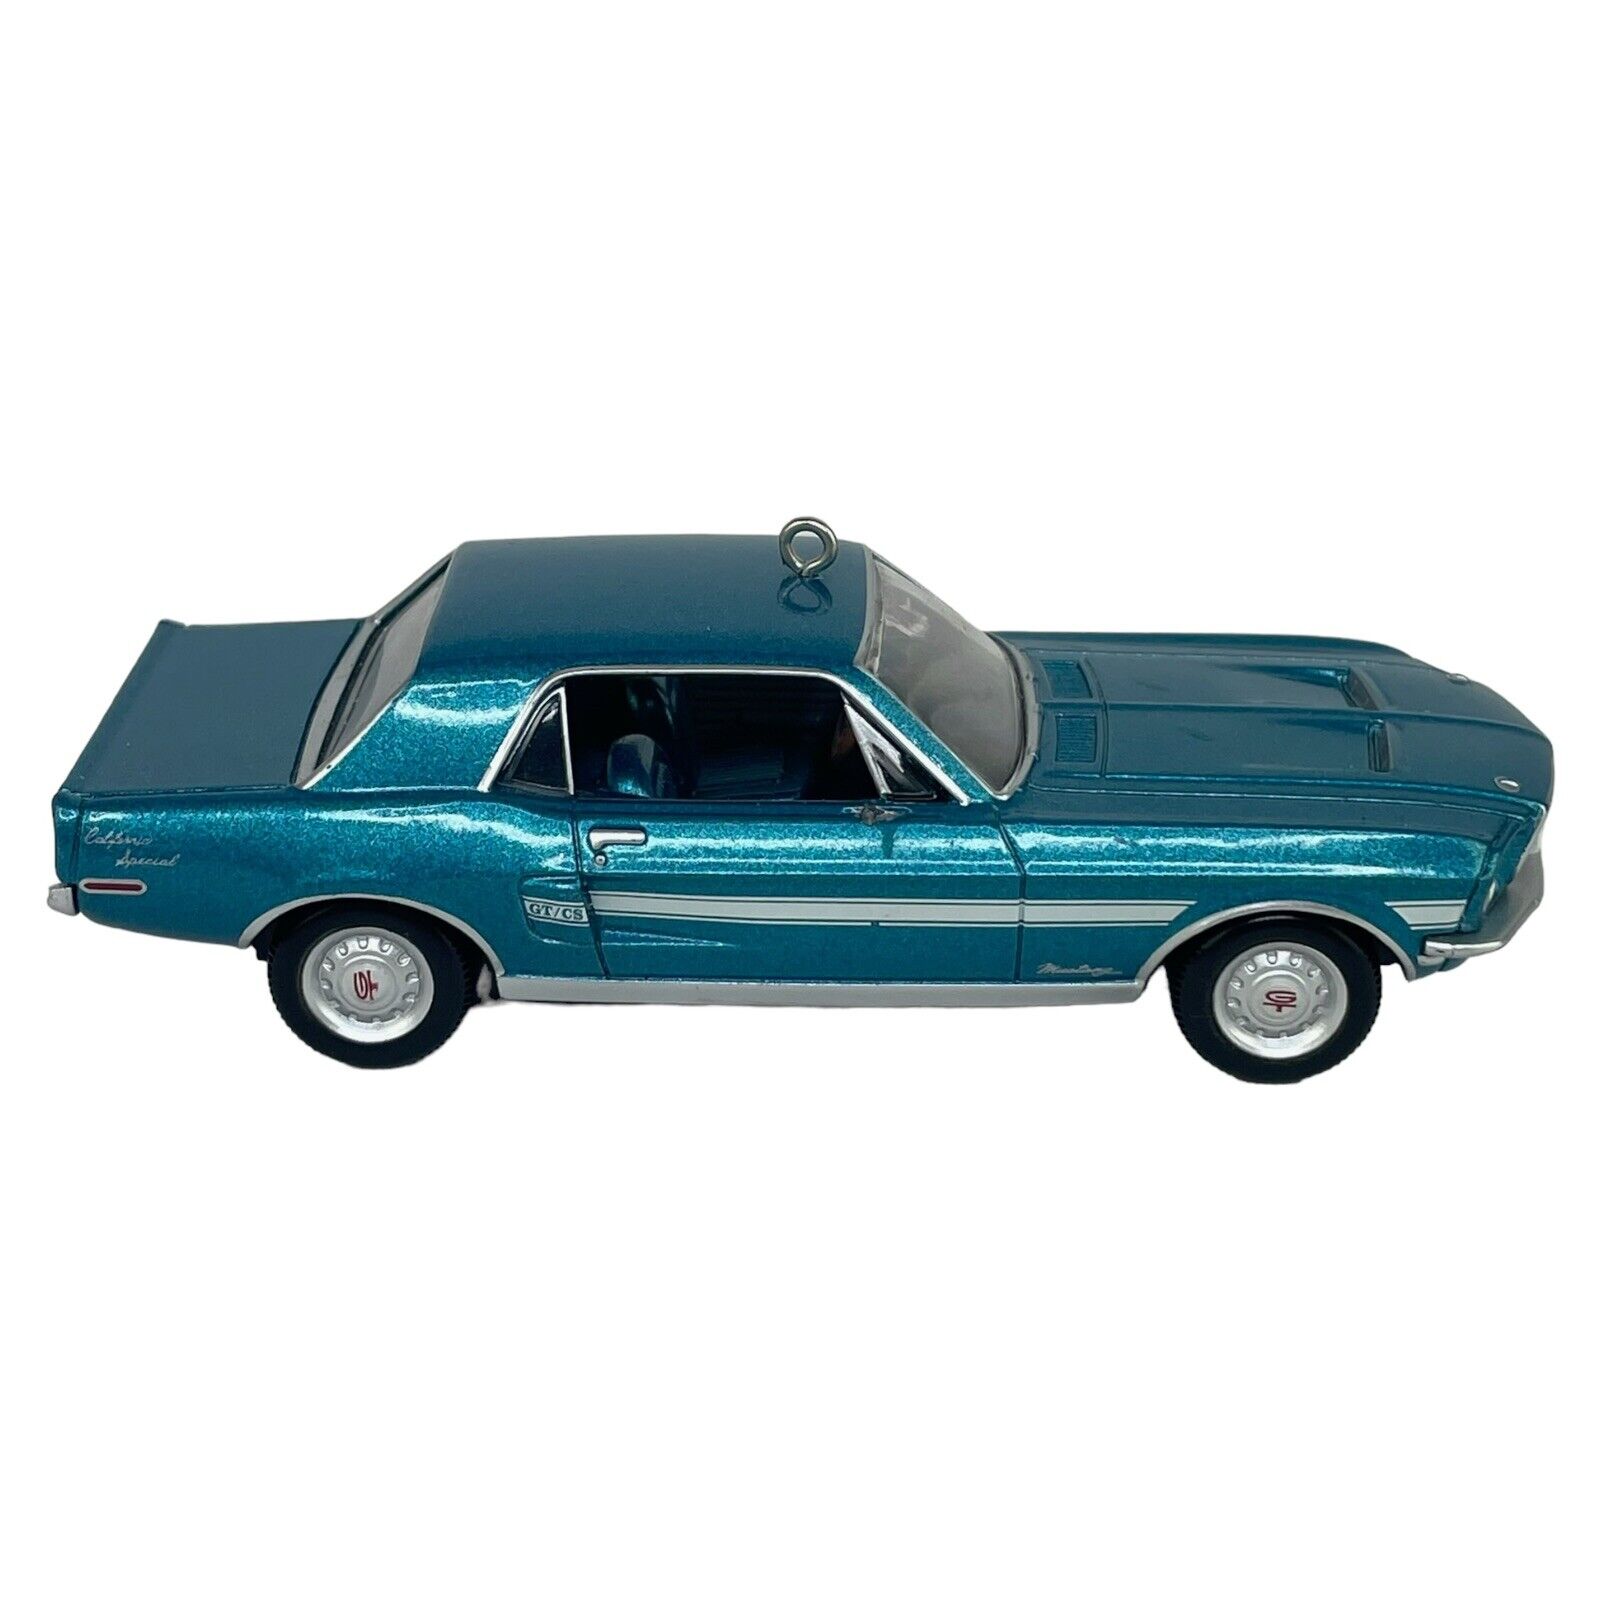 2018 1968 Ford Mustang California Special Hallmark Ornament Limited *No Box*